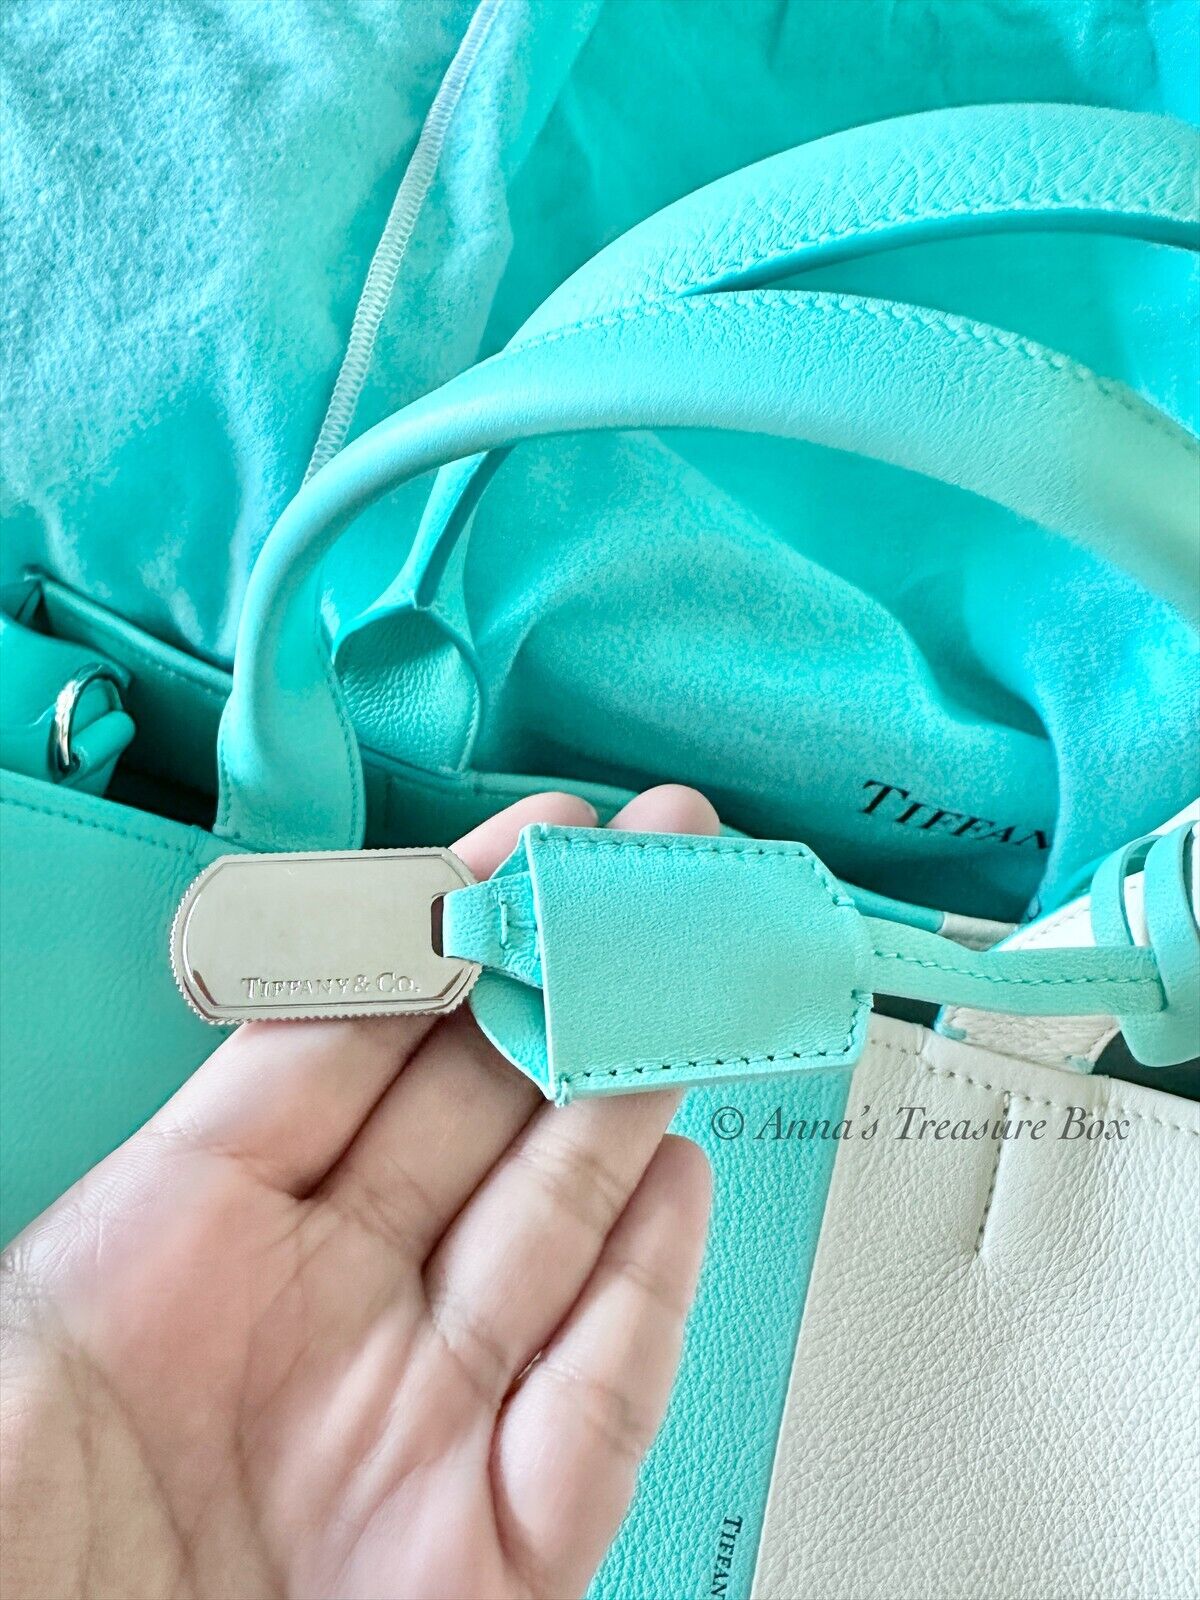 Tiffany & Co.'s New Leather Bags Look Exactly Like Its Shopping Bags So  Every Day Feels Like Christmas - ZULA.sg